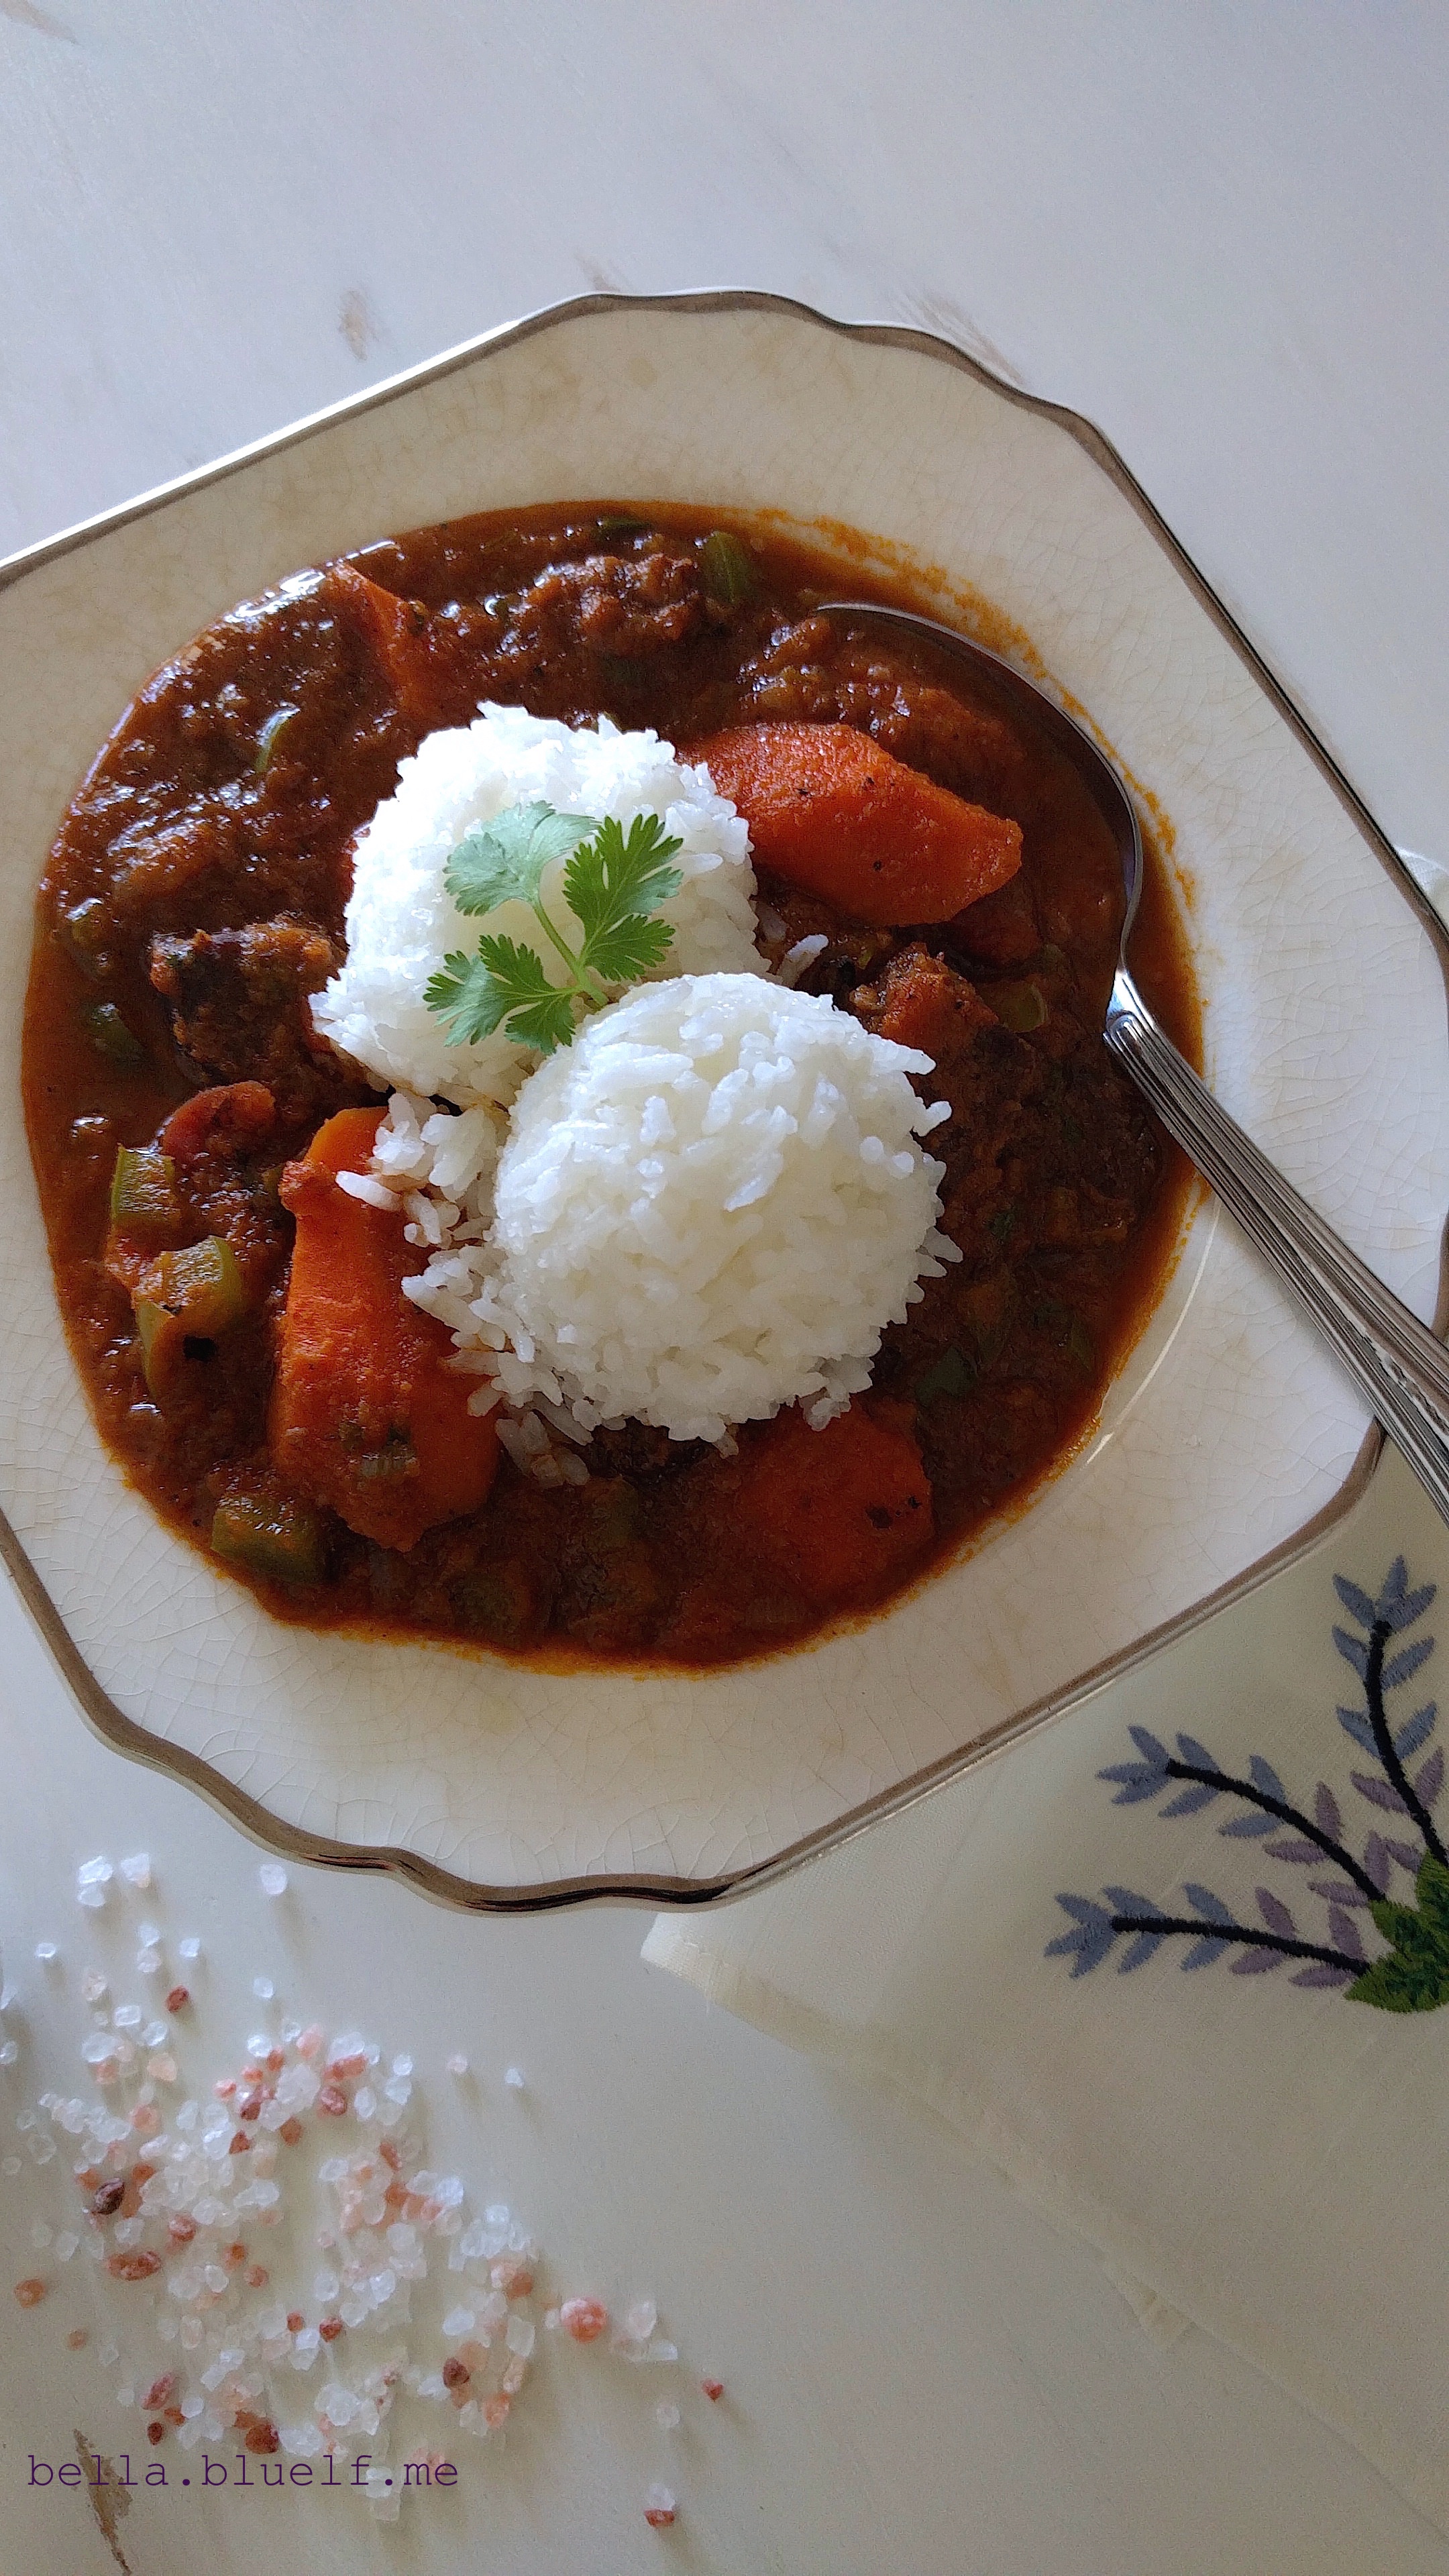 Carrots Stew with Prime Angus Beef - 2016 photo 3 by Rhônya Holman for bella.bluelf.me